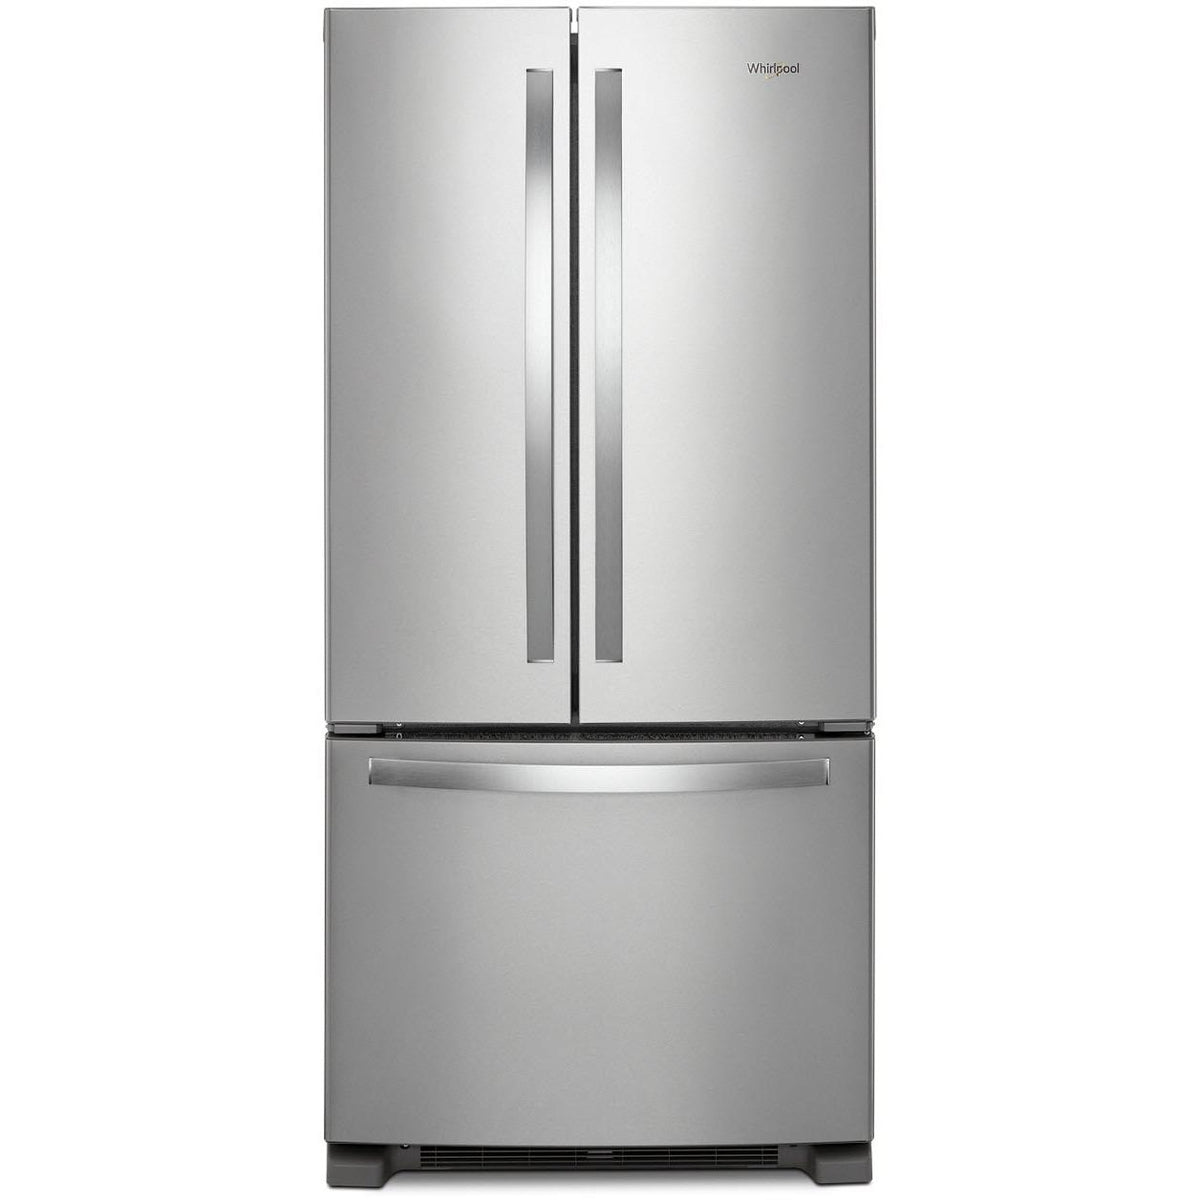 33-inch, 22.1 cu. ft. Freestanding French 3-Door Refrigerator with Factory Installed Ice Maker WRFF5333PZ IMAGE 1